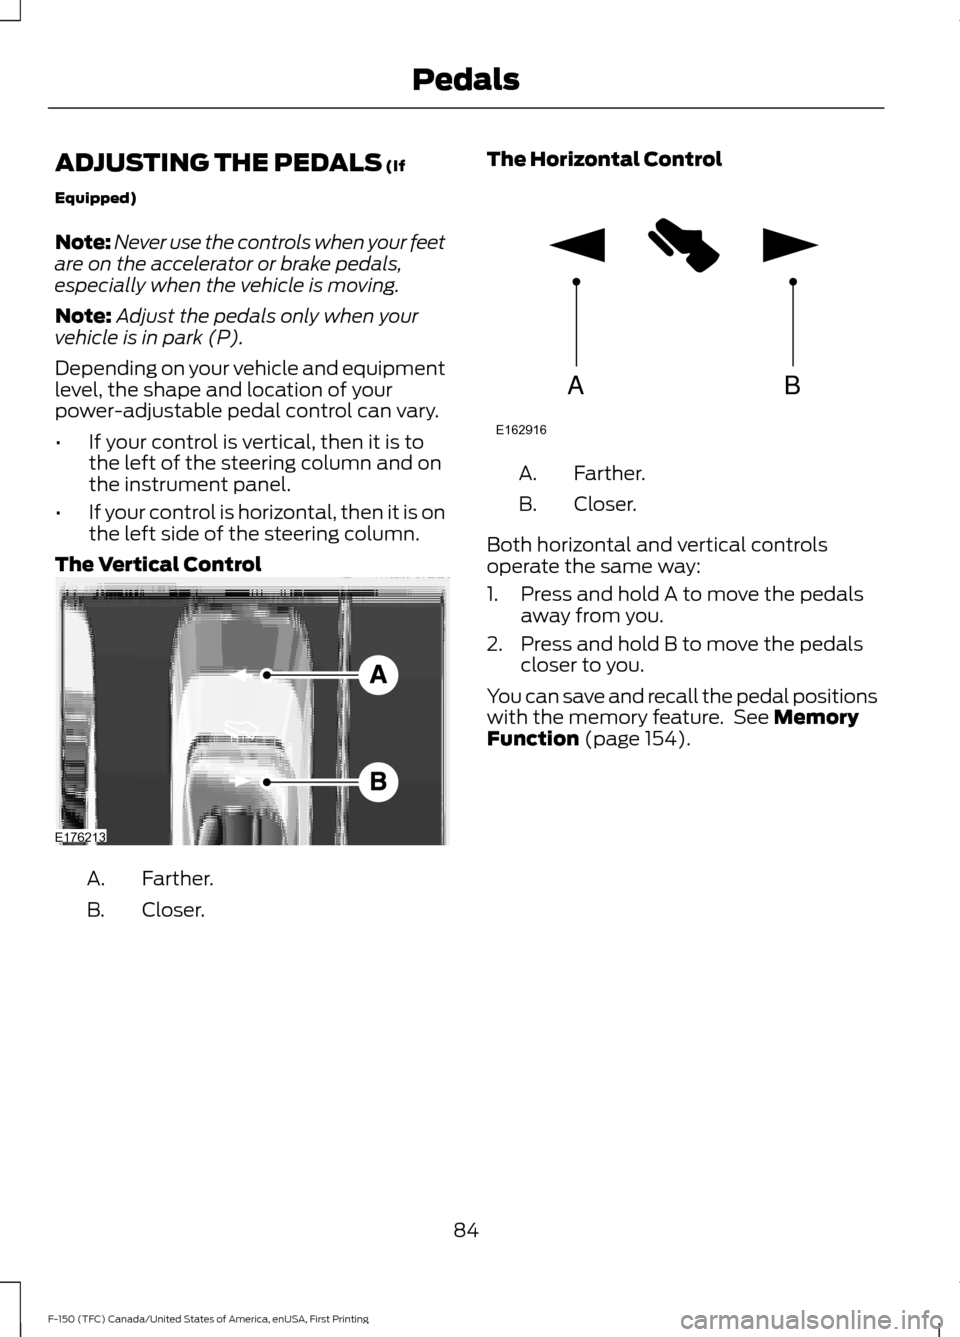 FORD F150 2017 13.G Owners Manual ADJUSTING THE PEDALS (If
Equipped)
Note: Never use the controls when your feet
are on the accelerator or brake pedals,
especially when the vehicle is moving.
Note: Adjust the pedals only when your
veh